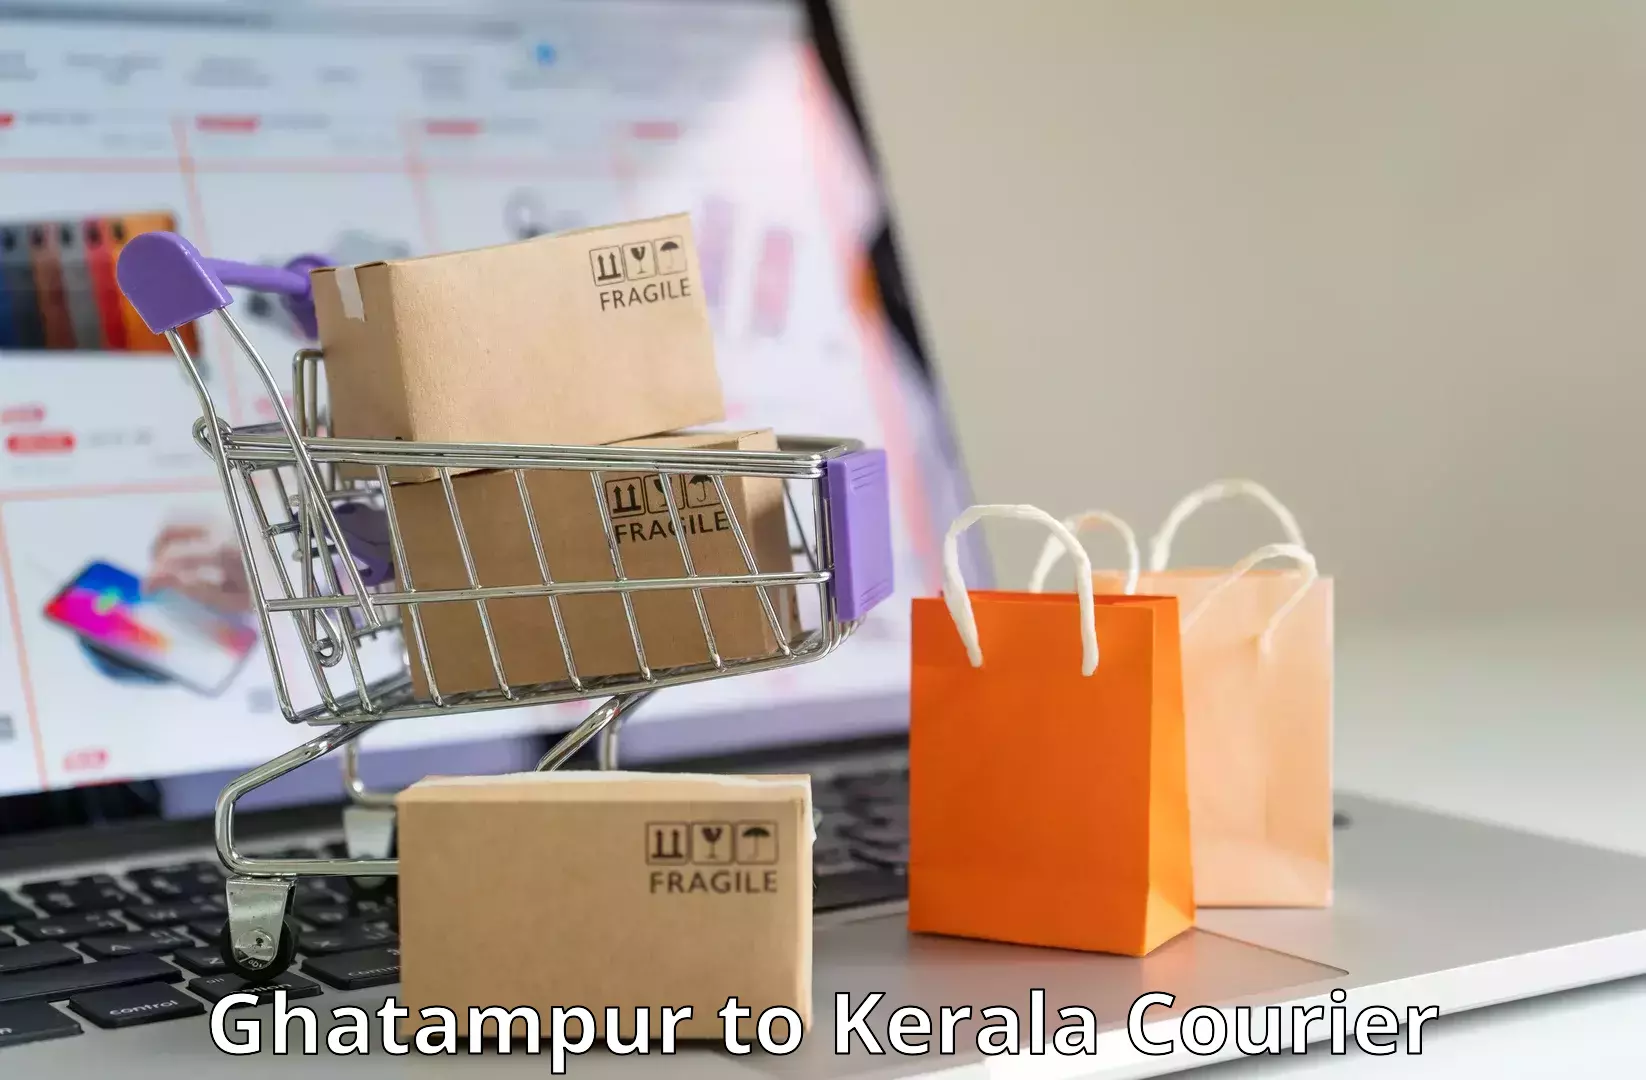 Online courier booking Ghatampur to Calicut University Malappuram